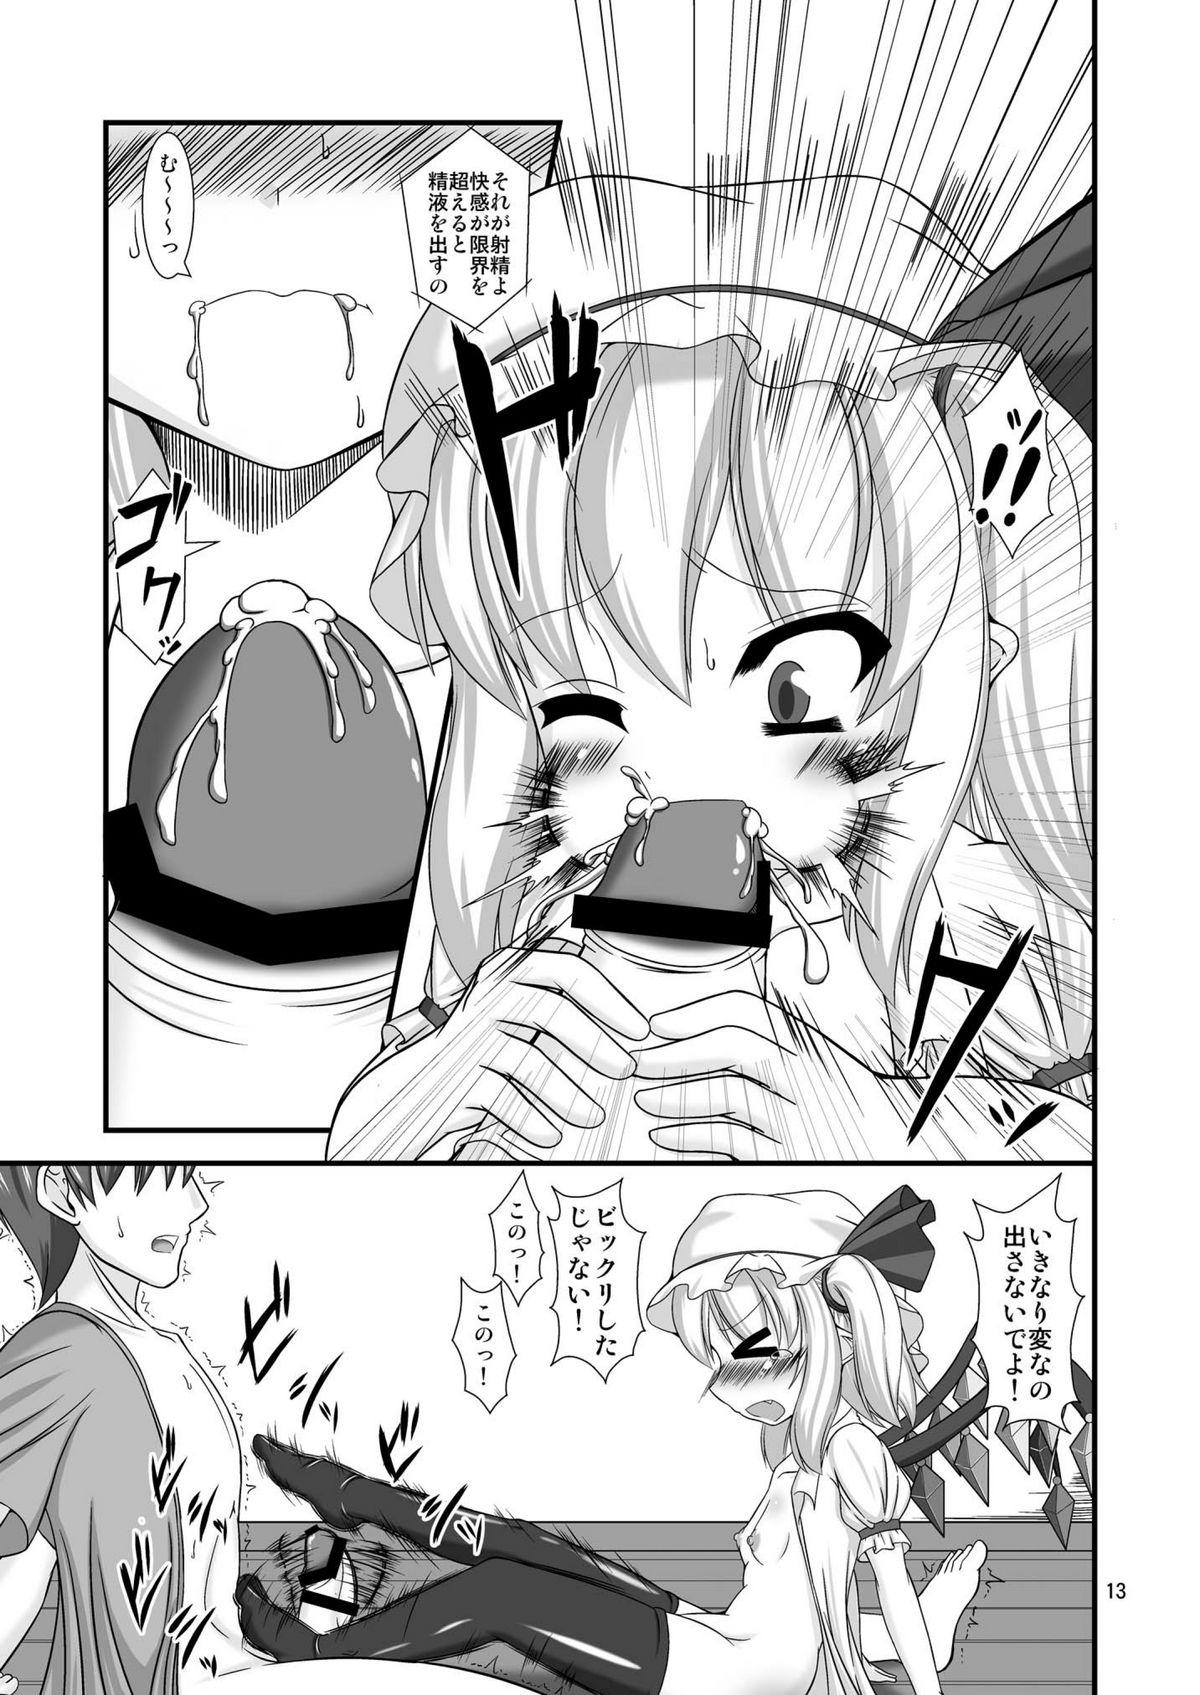 Licking Touhou do-M Hoihoi - Touhou project Youporn - Page 13